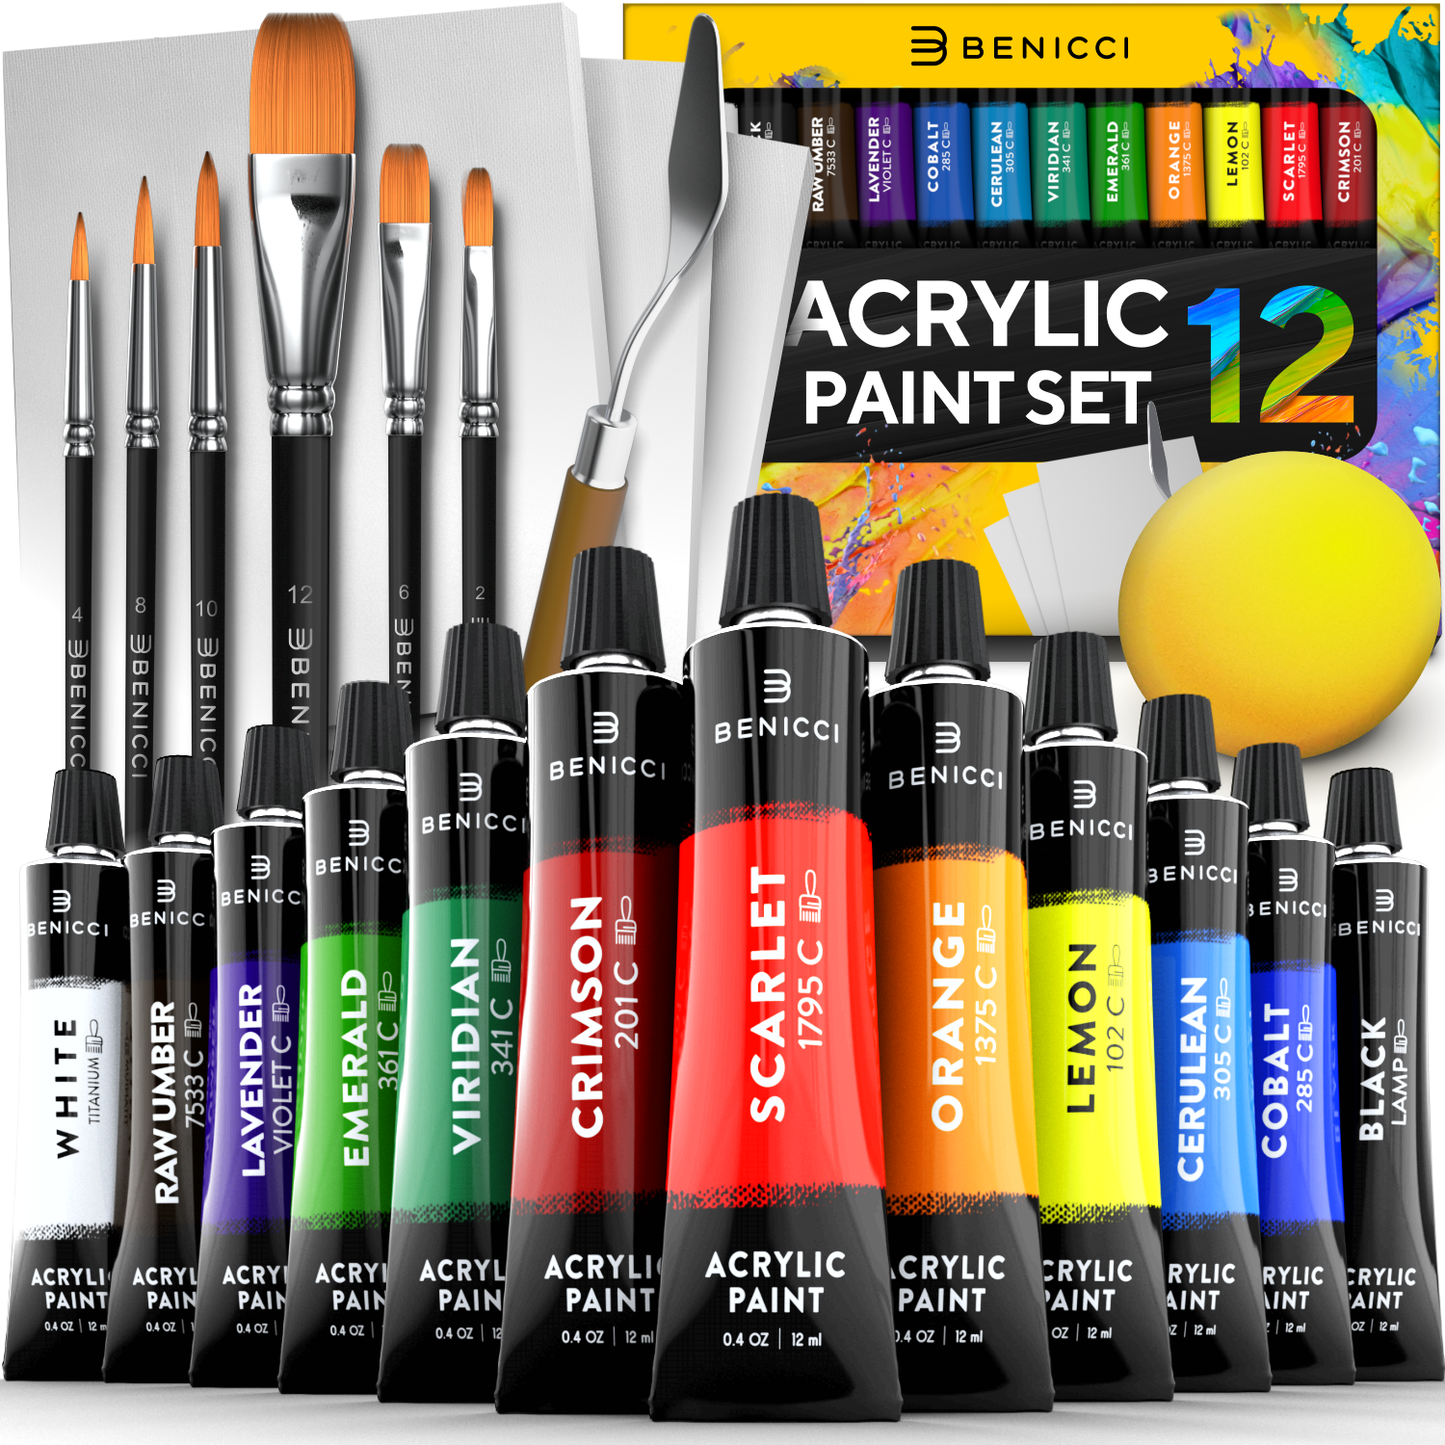 Colorations Metallic Paint - Set of 6 Vibrant Colors for Art Projects | Non-Toxic Water-Based Paint for Children | Ideal for Crafts, Painting on Paper